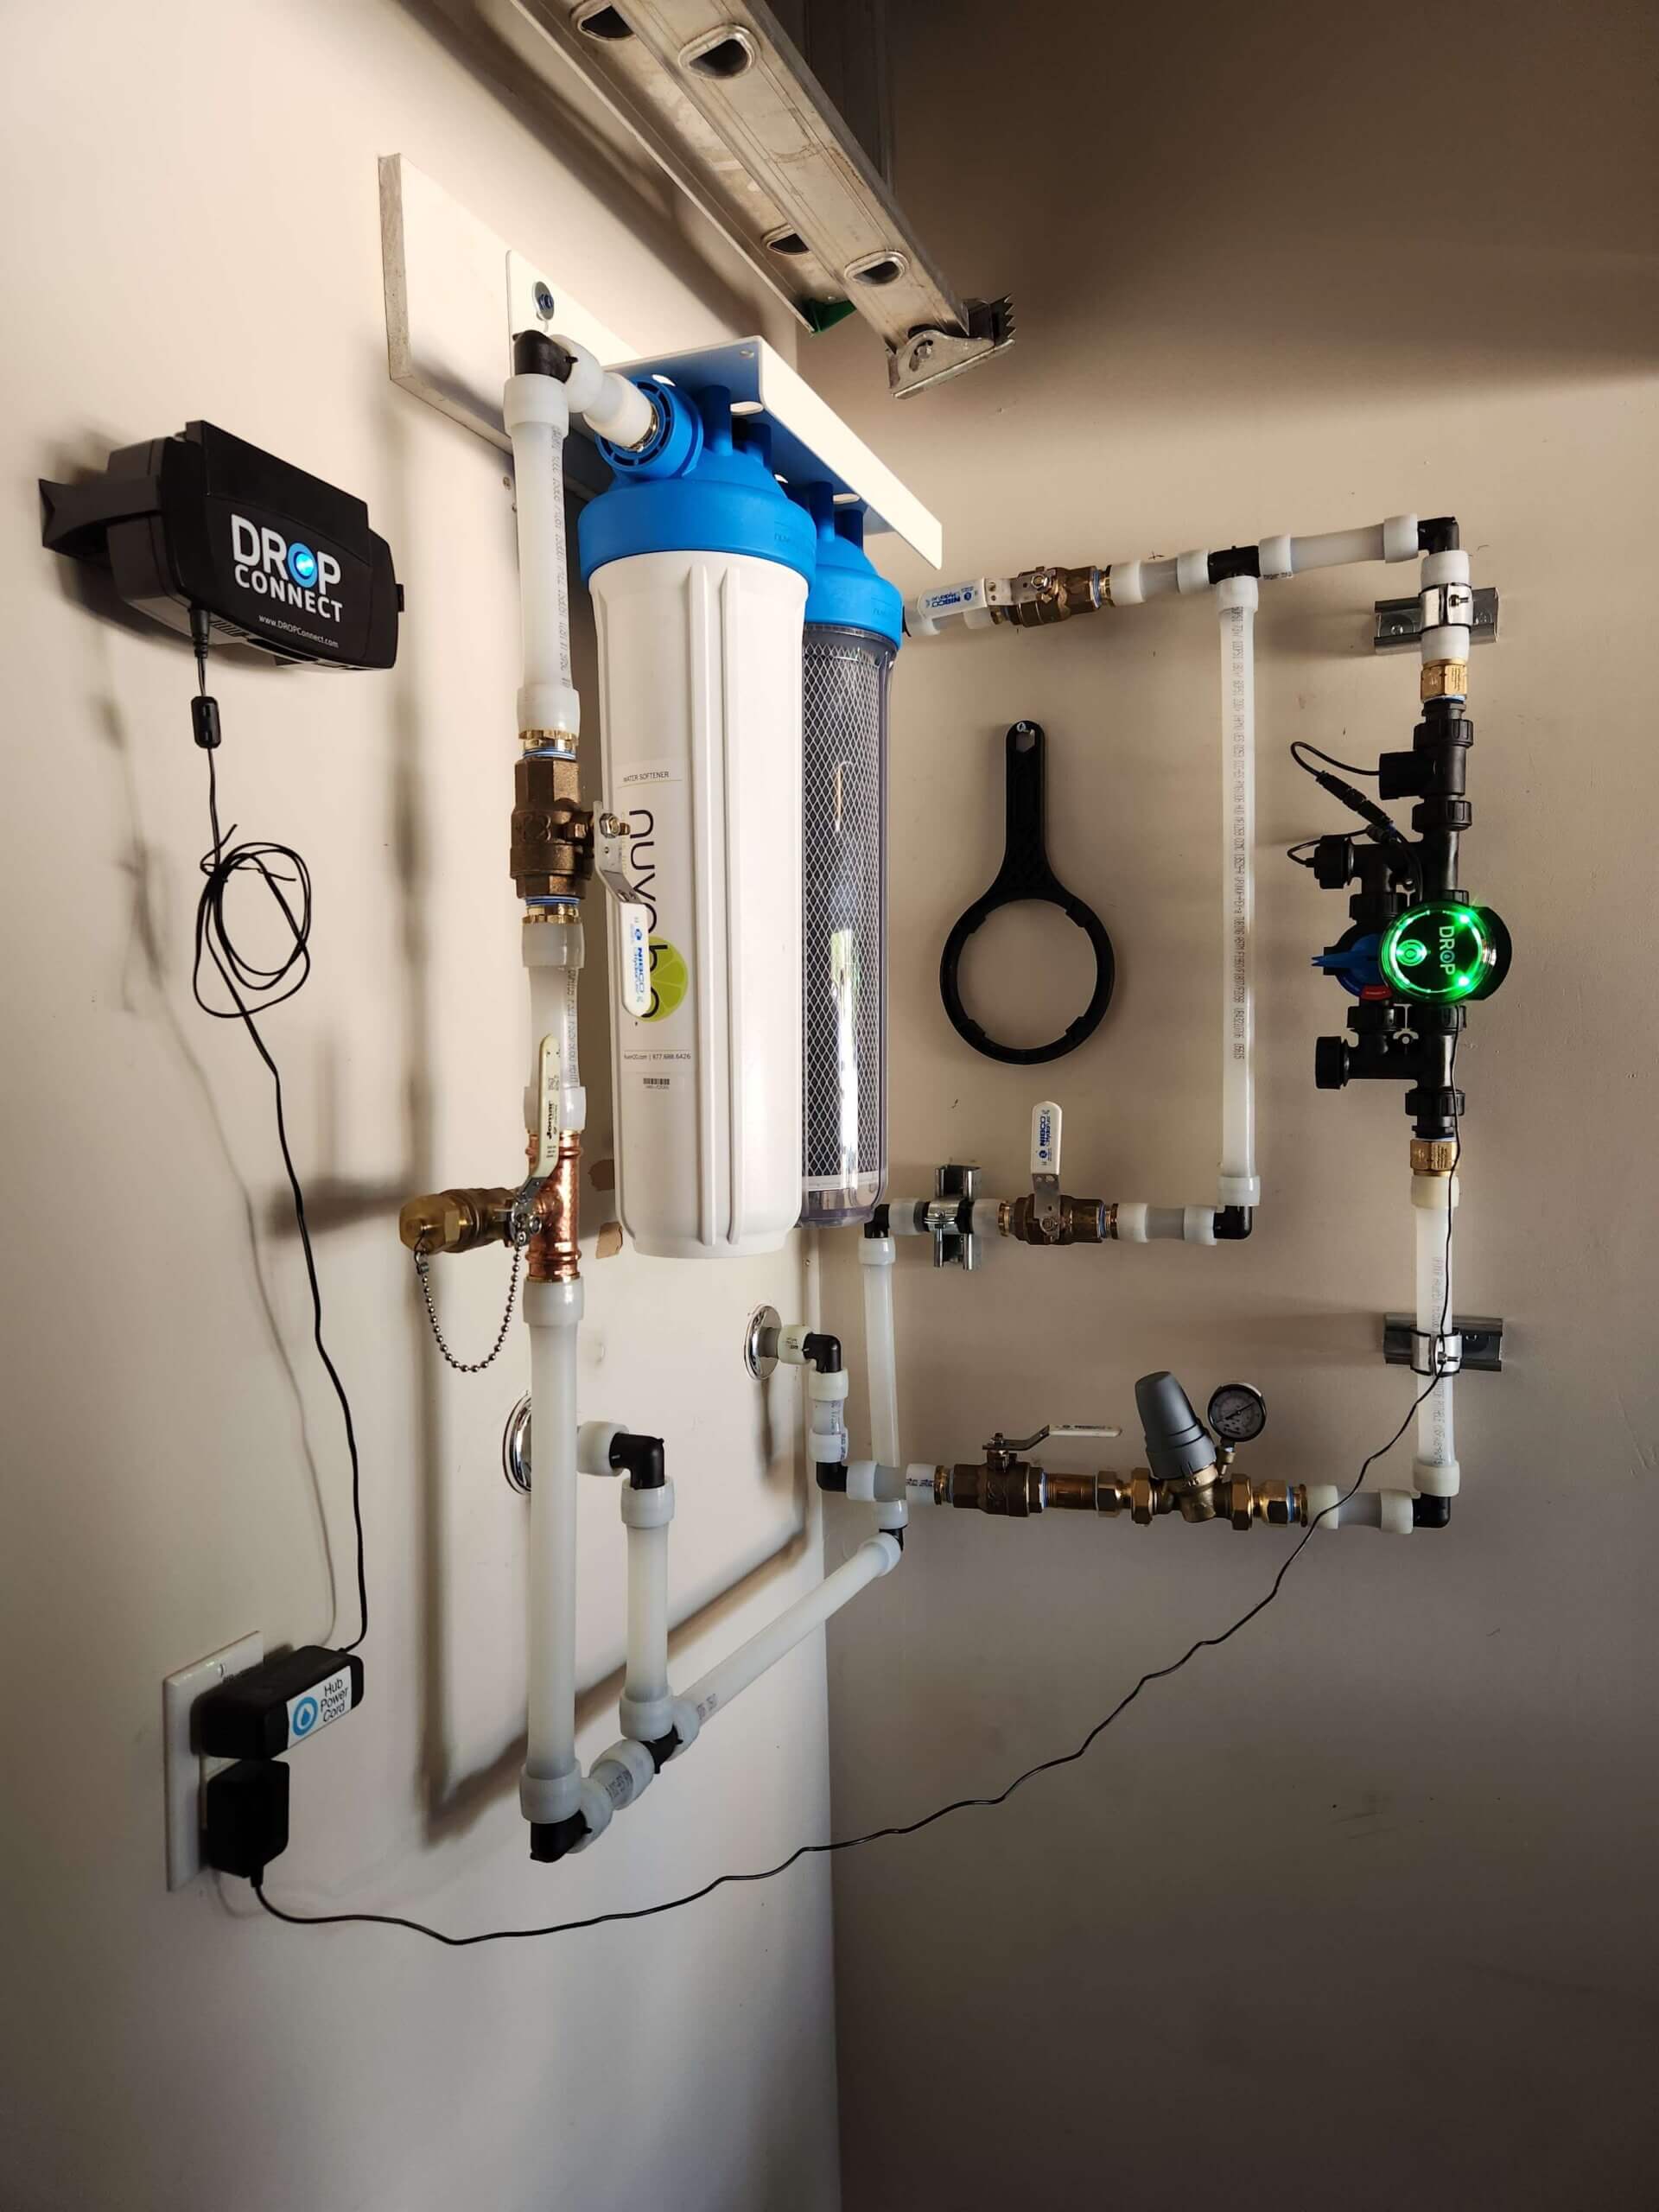 Watersoftener and auto shutoff system